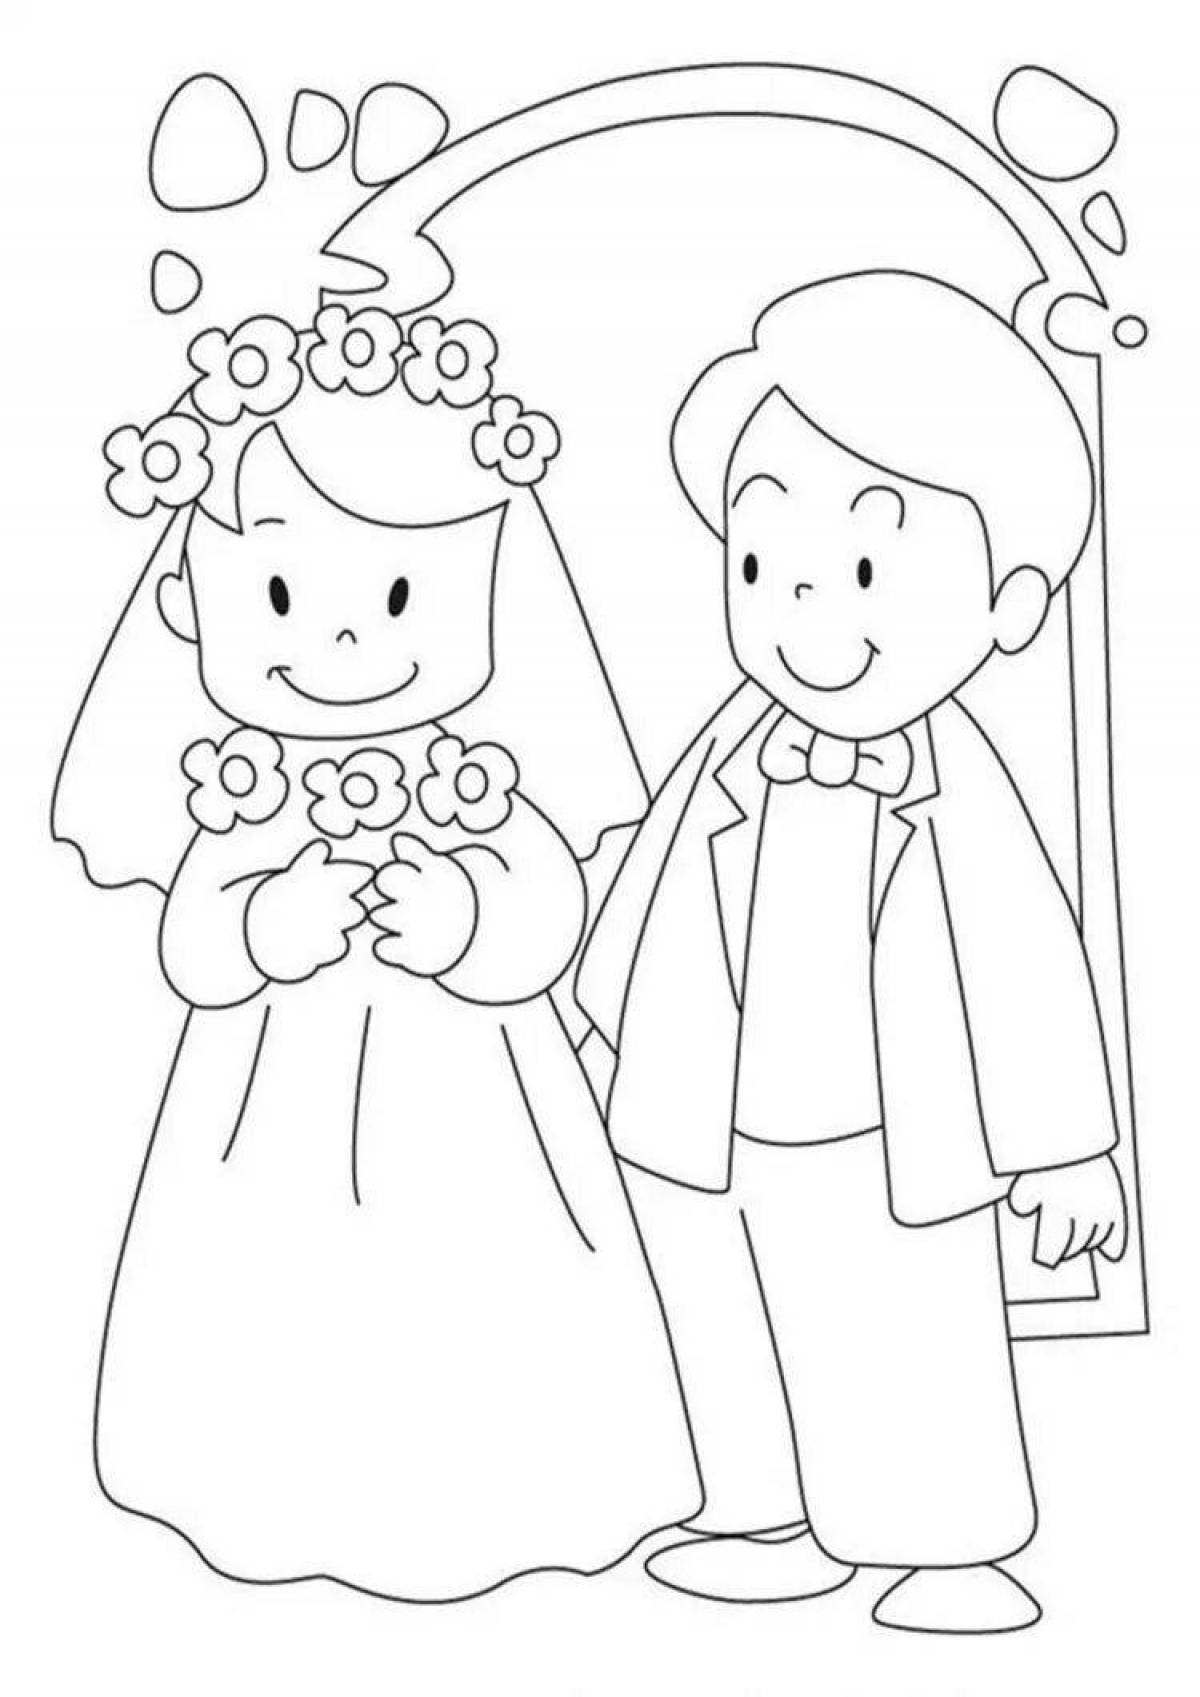 Great wedding coloring book for kids